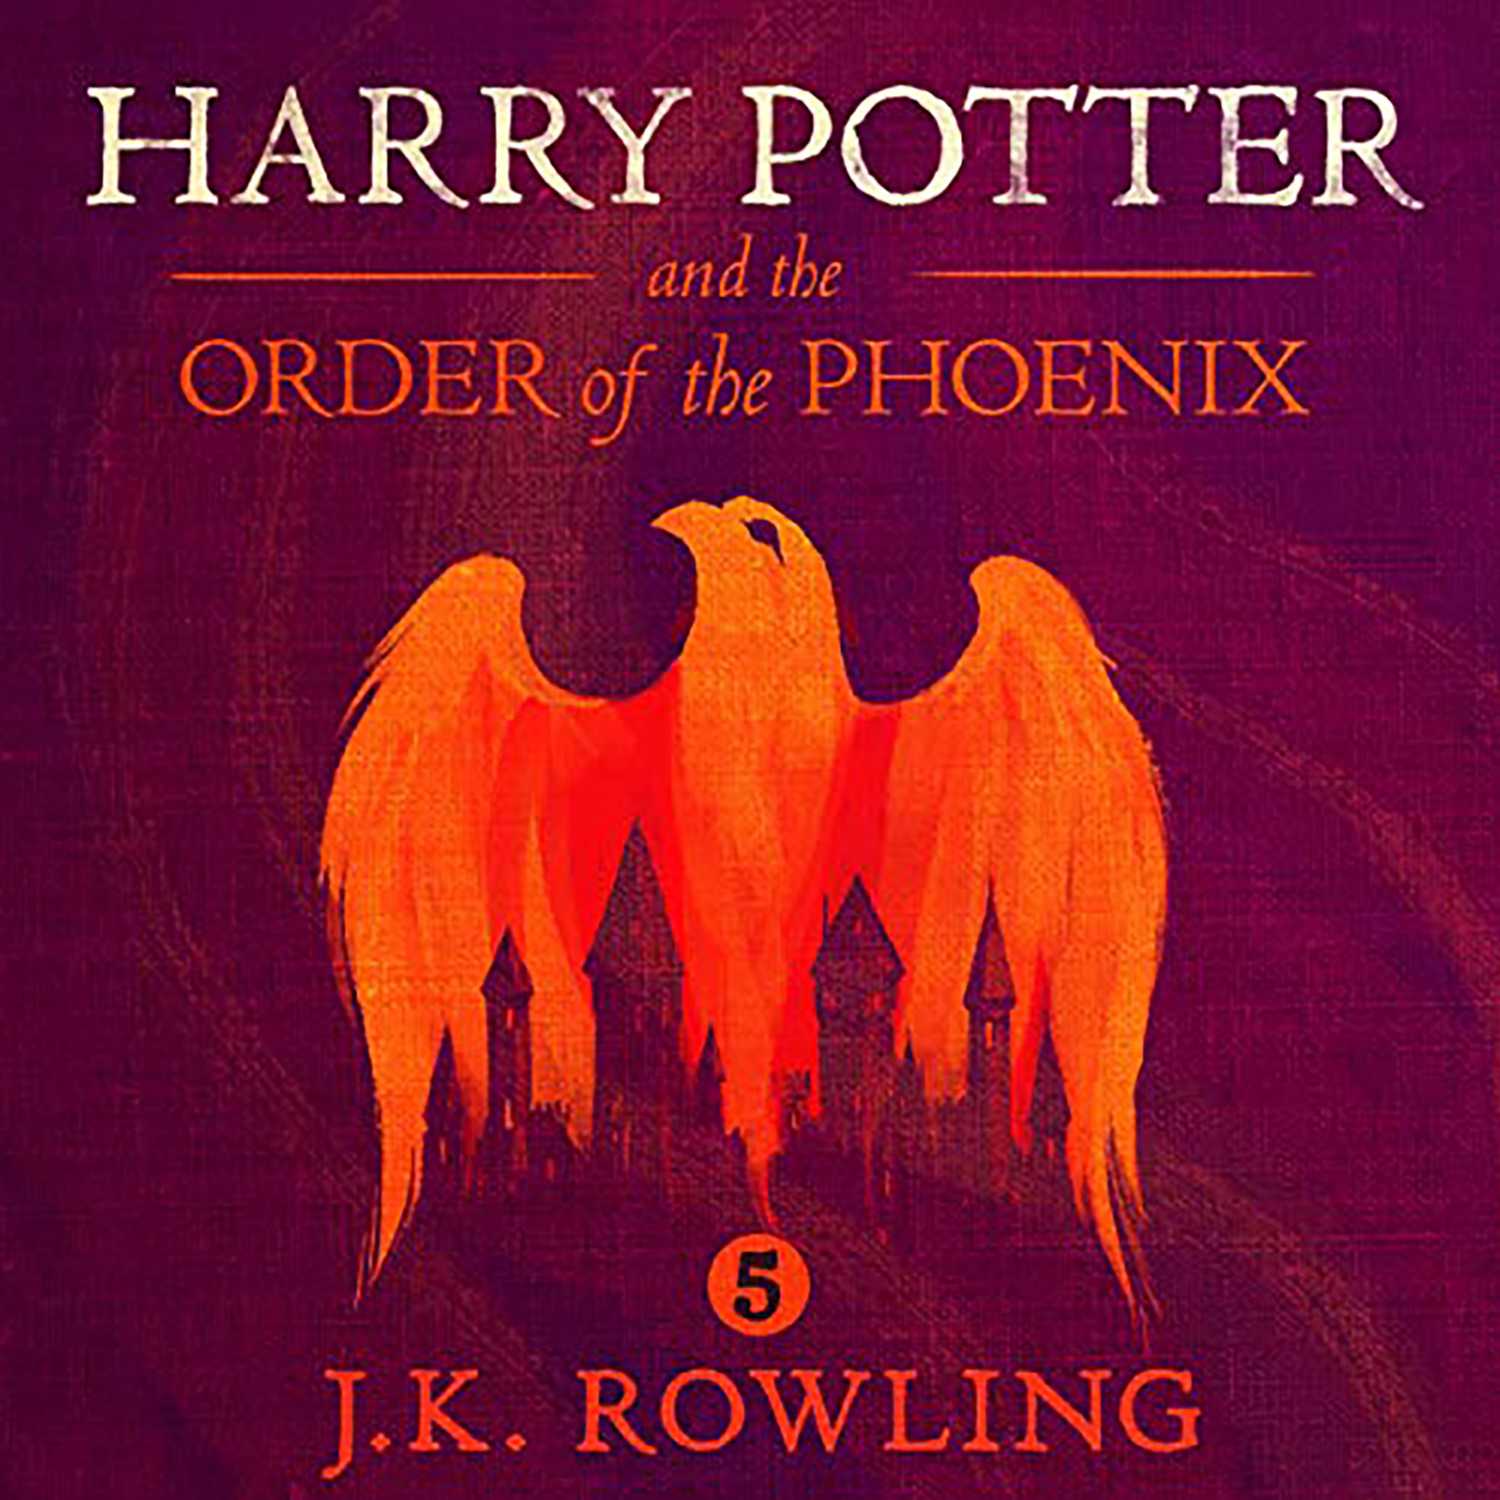 Harry Potter and the Order of the Phoenix Part 1